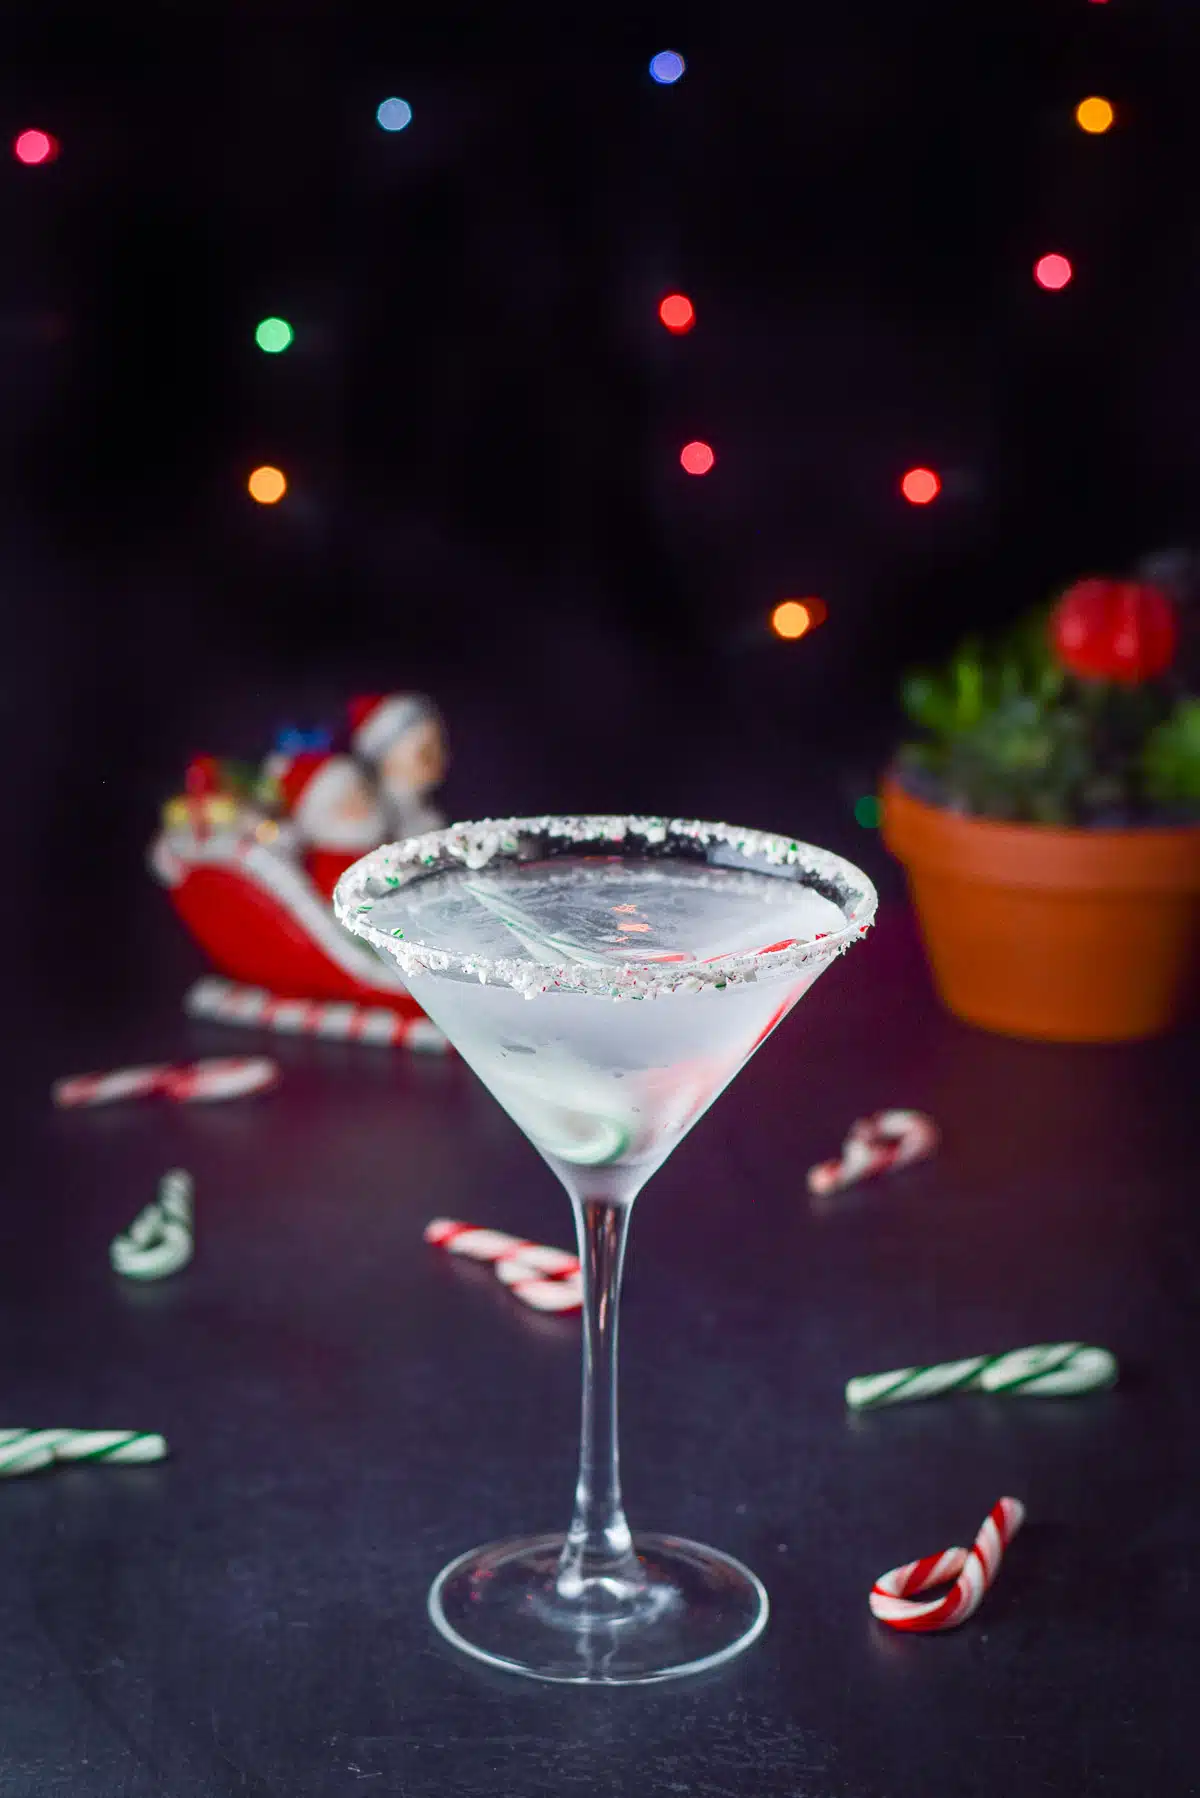 A glass with peppermint crushed on the rim is filled with a clear cocktail. There are lights in the back and candy canes on the table